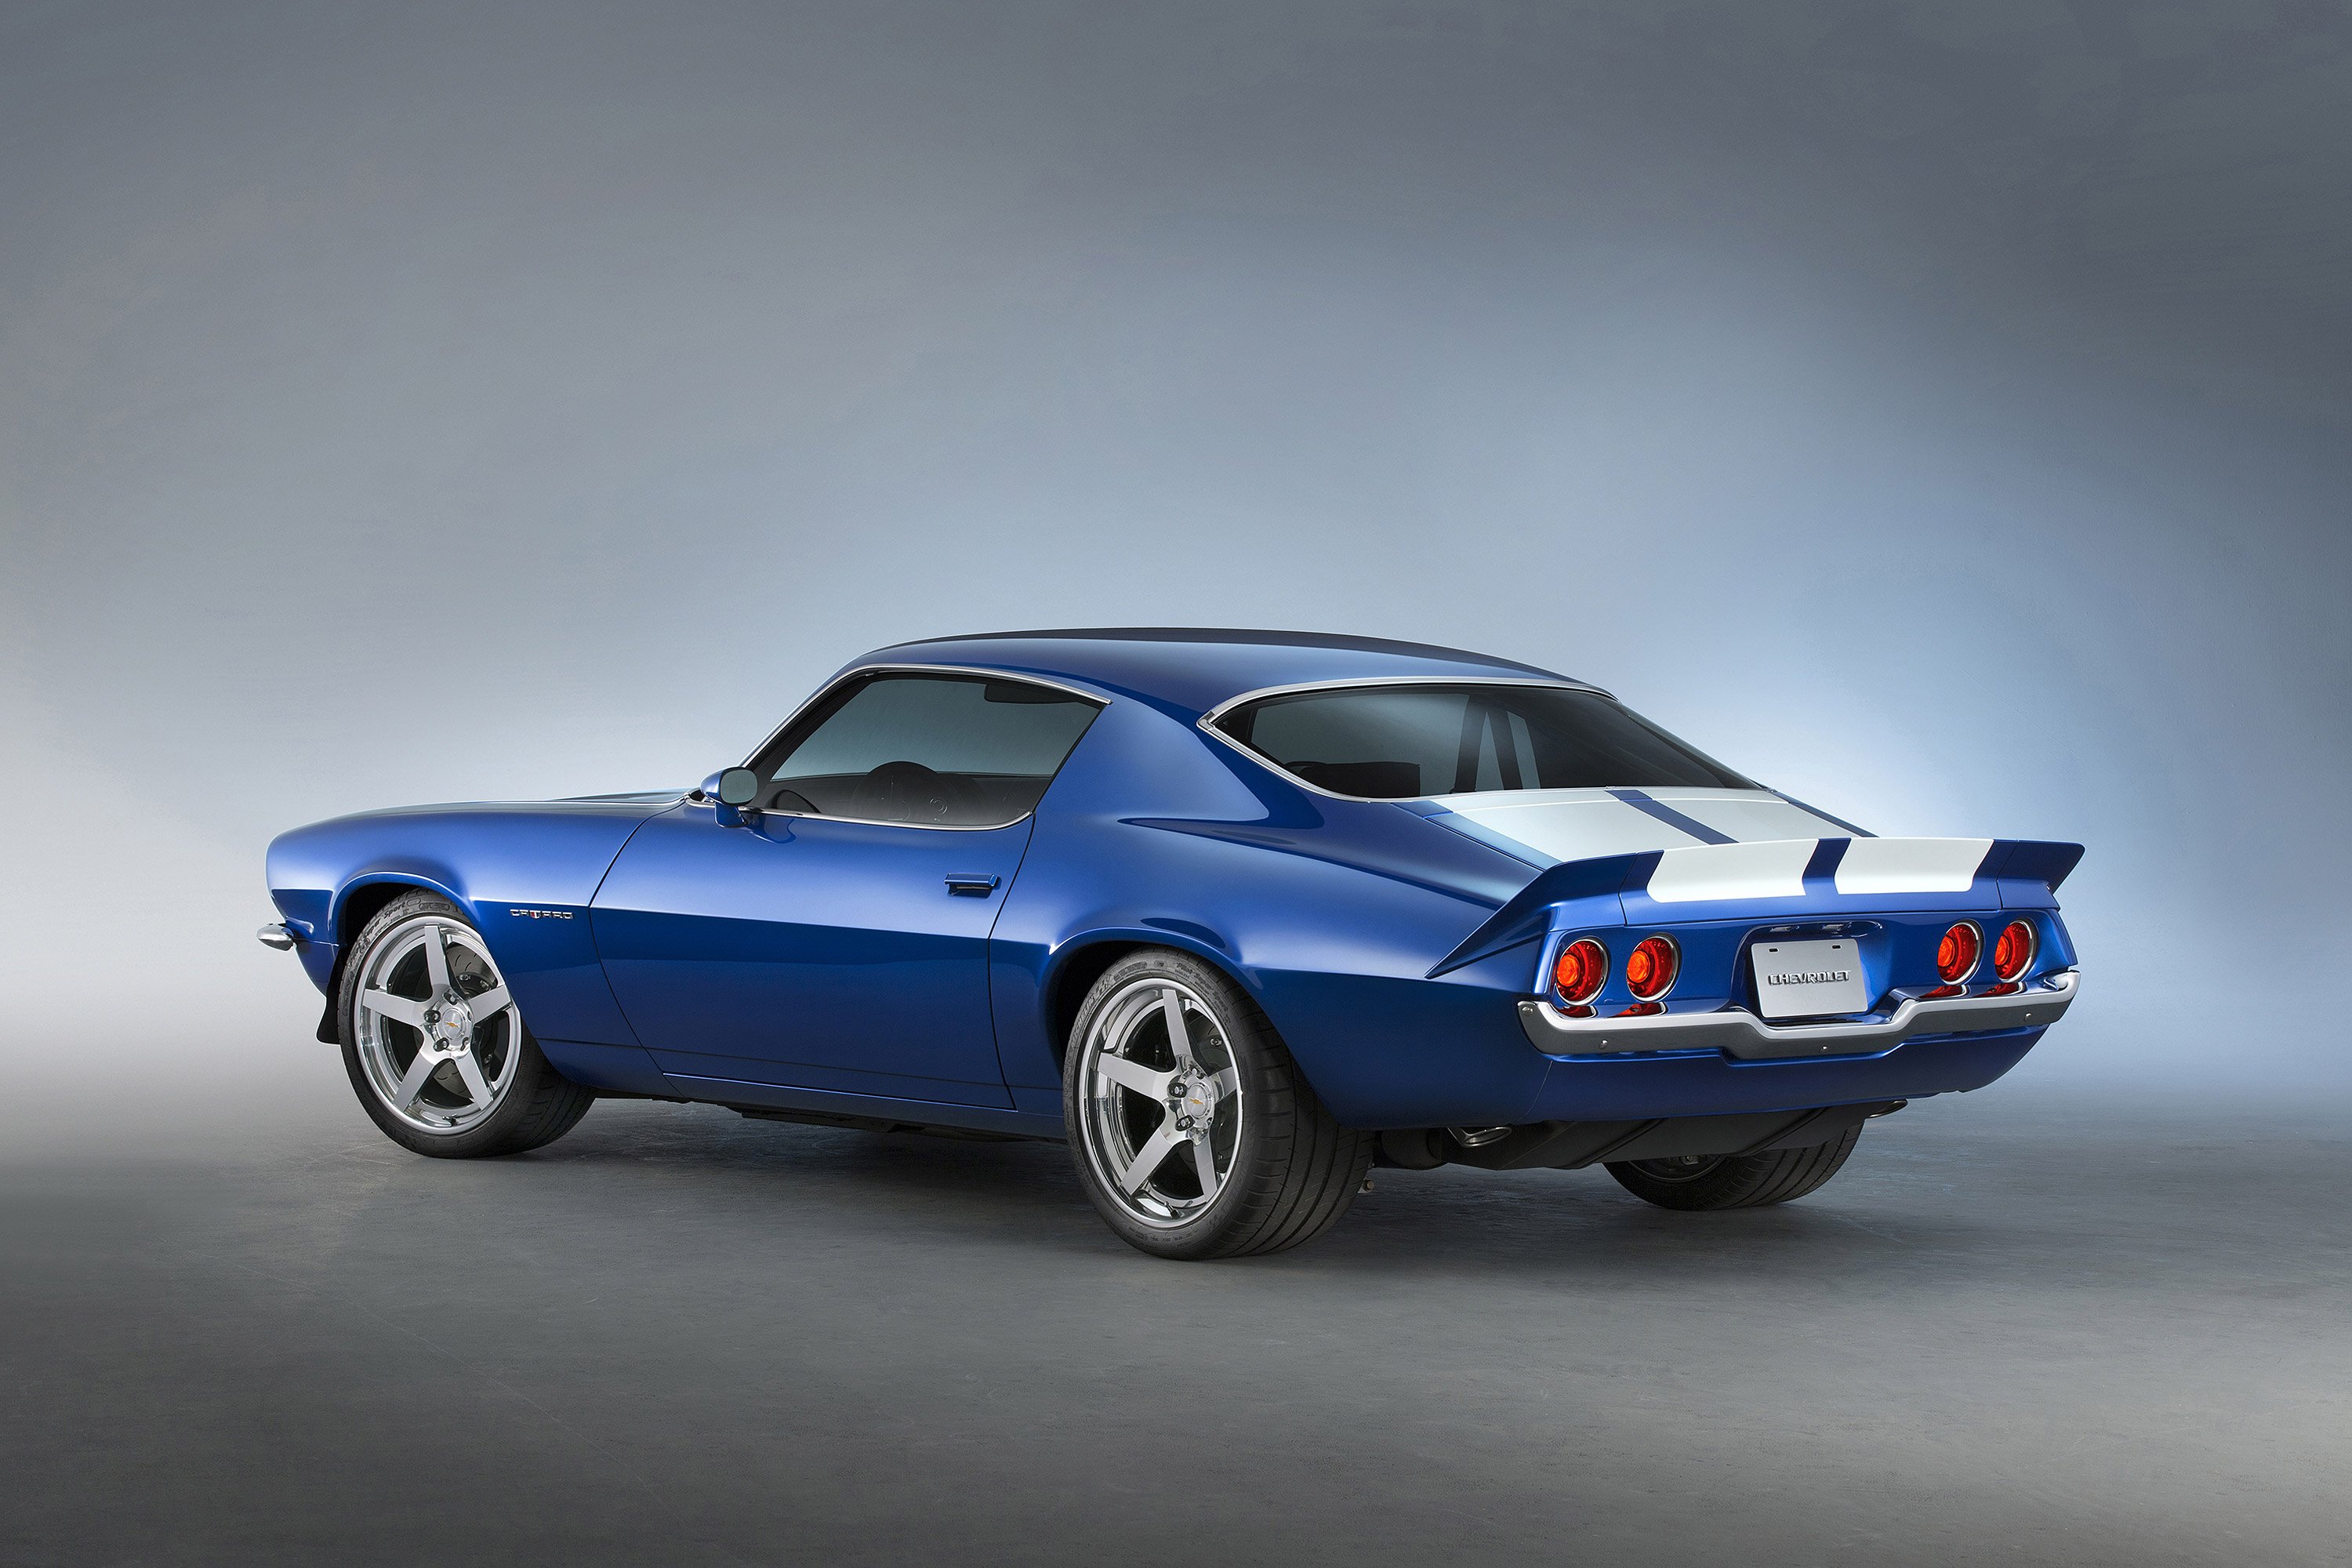 2015, Chevrolet, 1970, Camaro, Rs, Supercharged, Lt4, Concept, Muscle, Hot, Rod, Rods Wallpaper